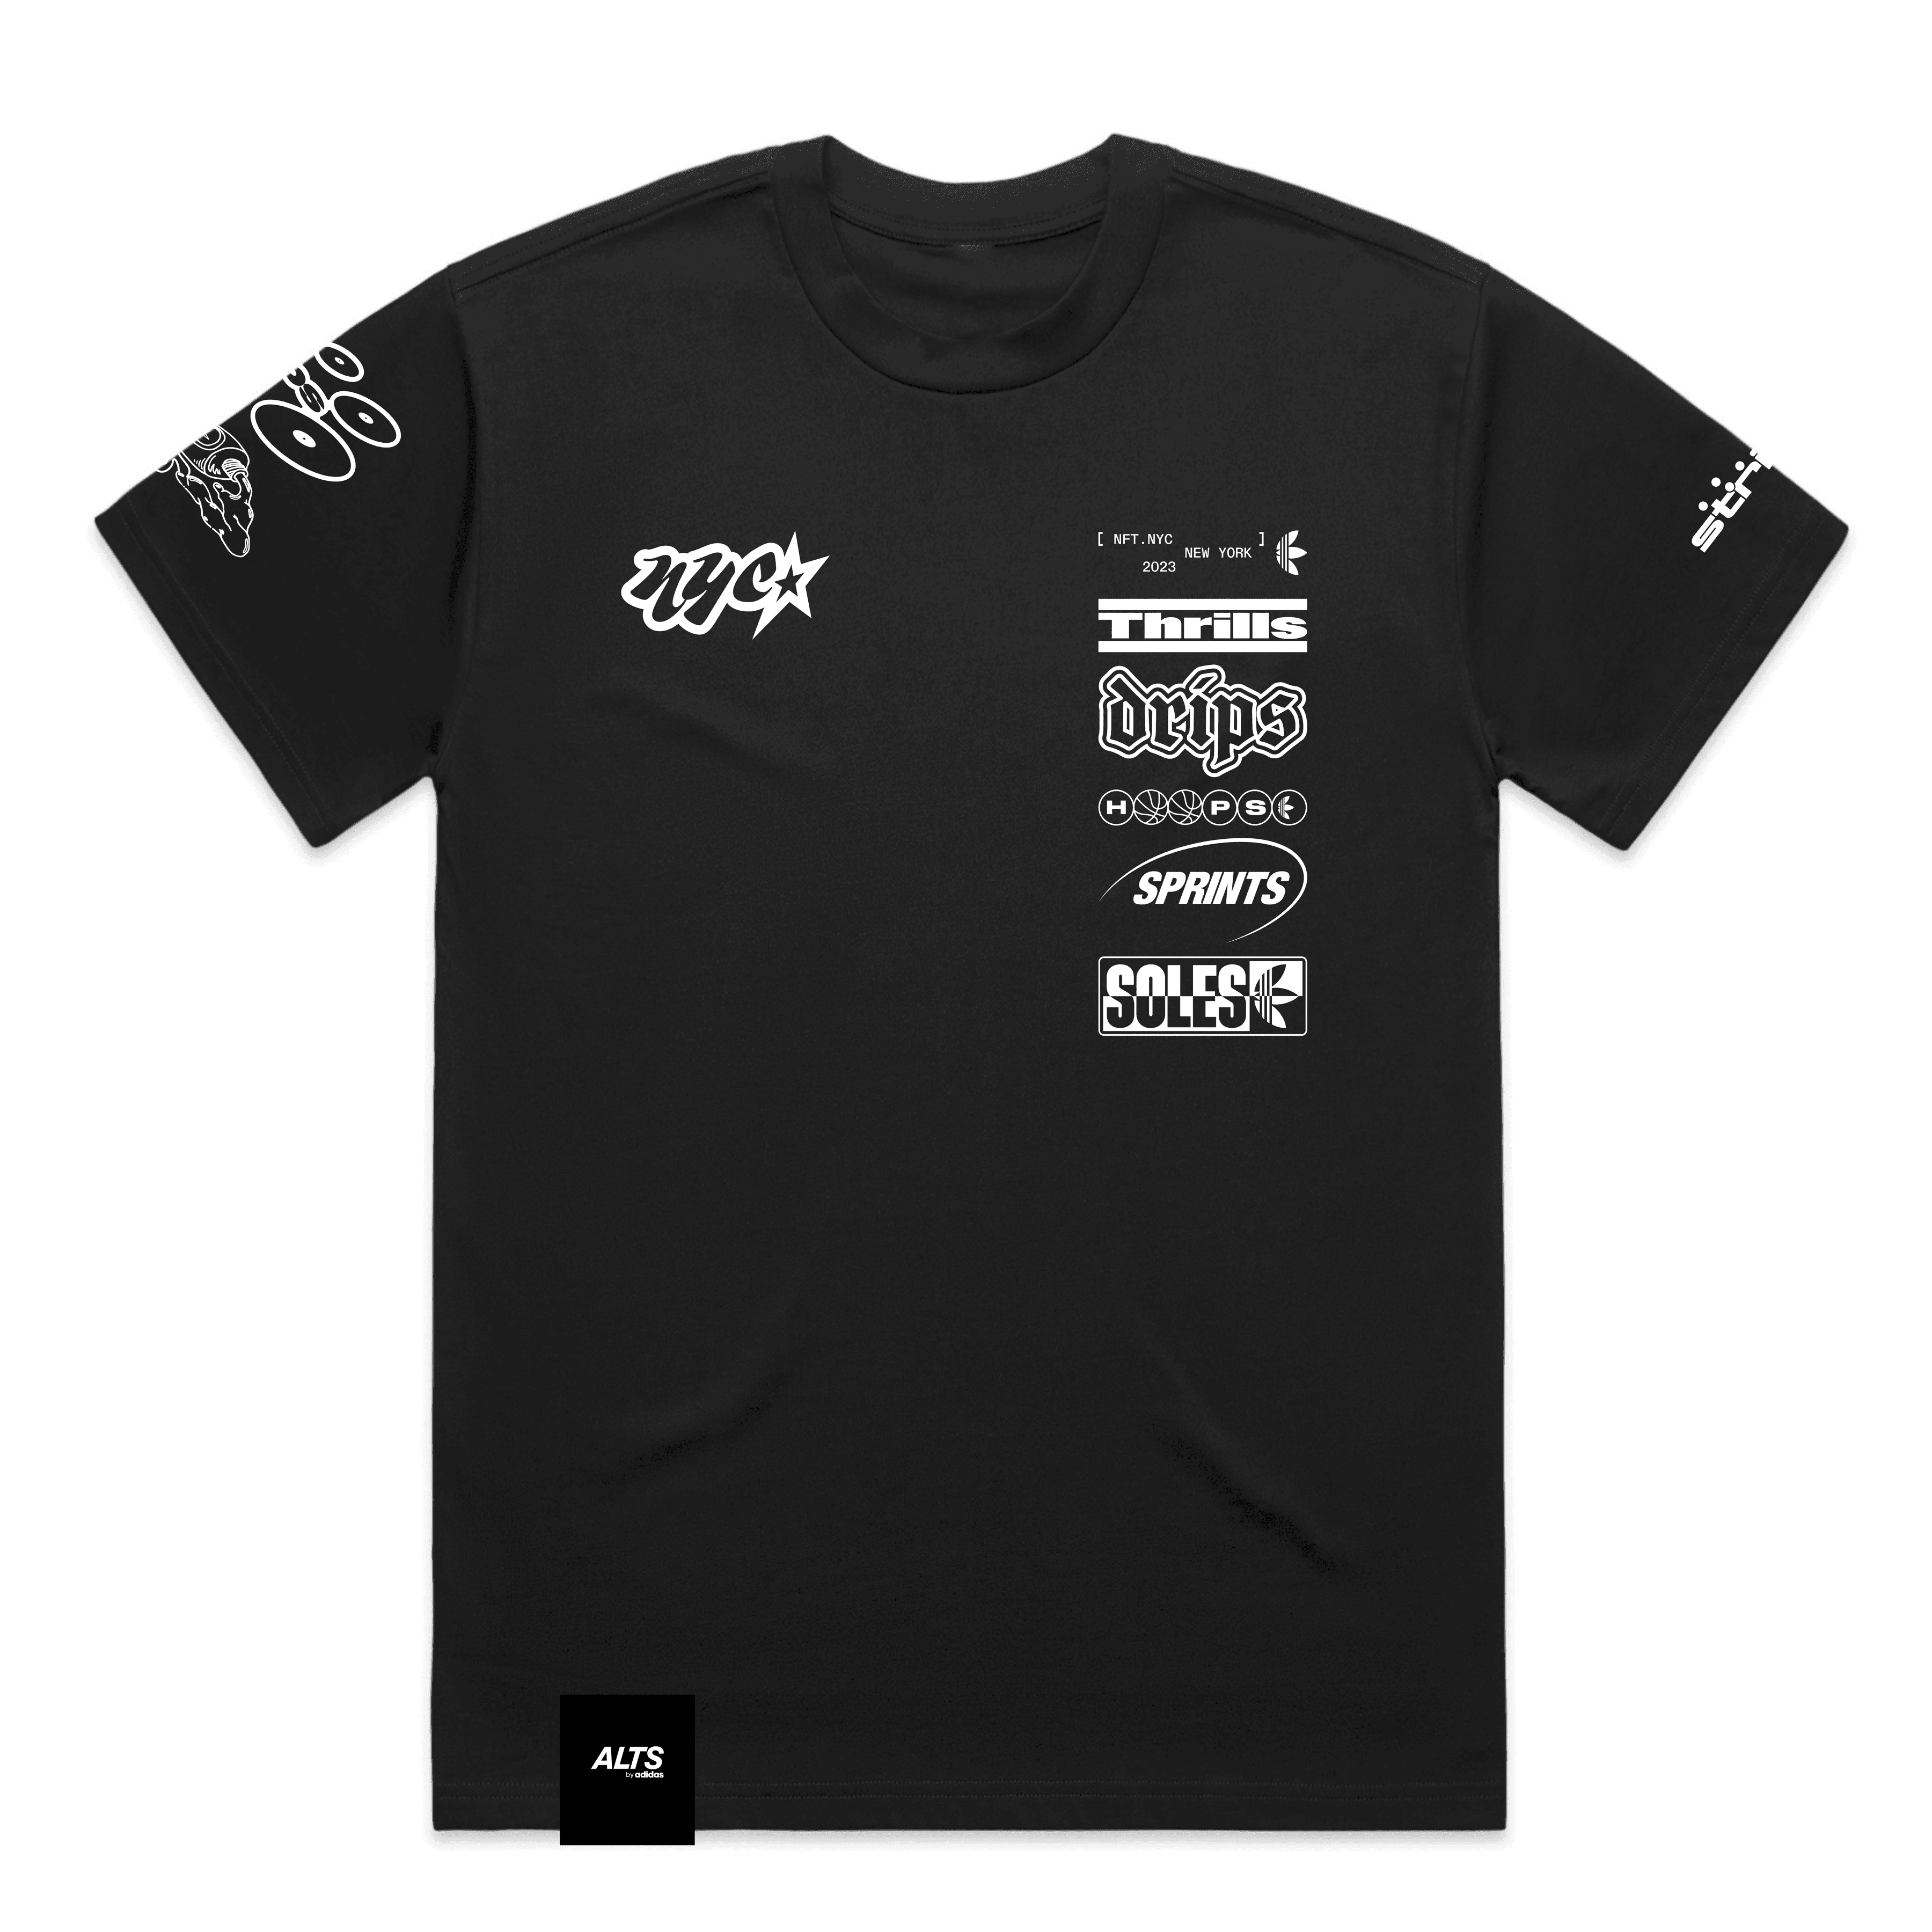 ALTS by adidas: AMPS Tee #212